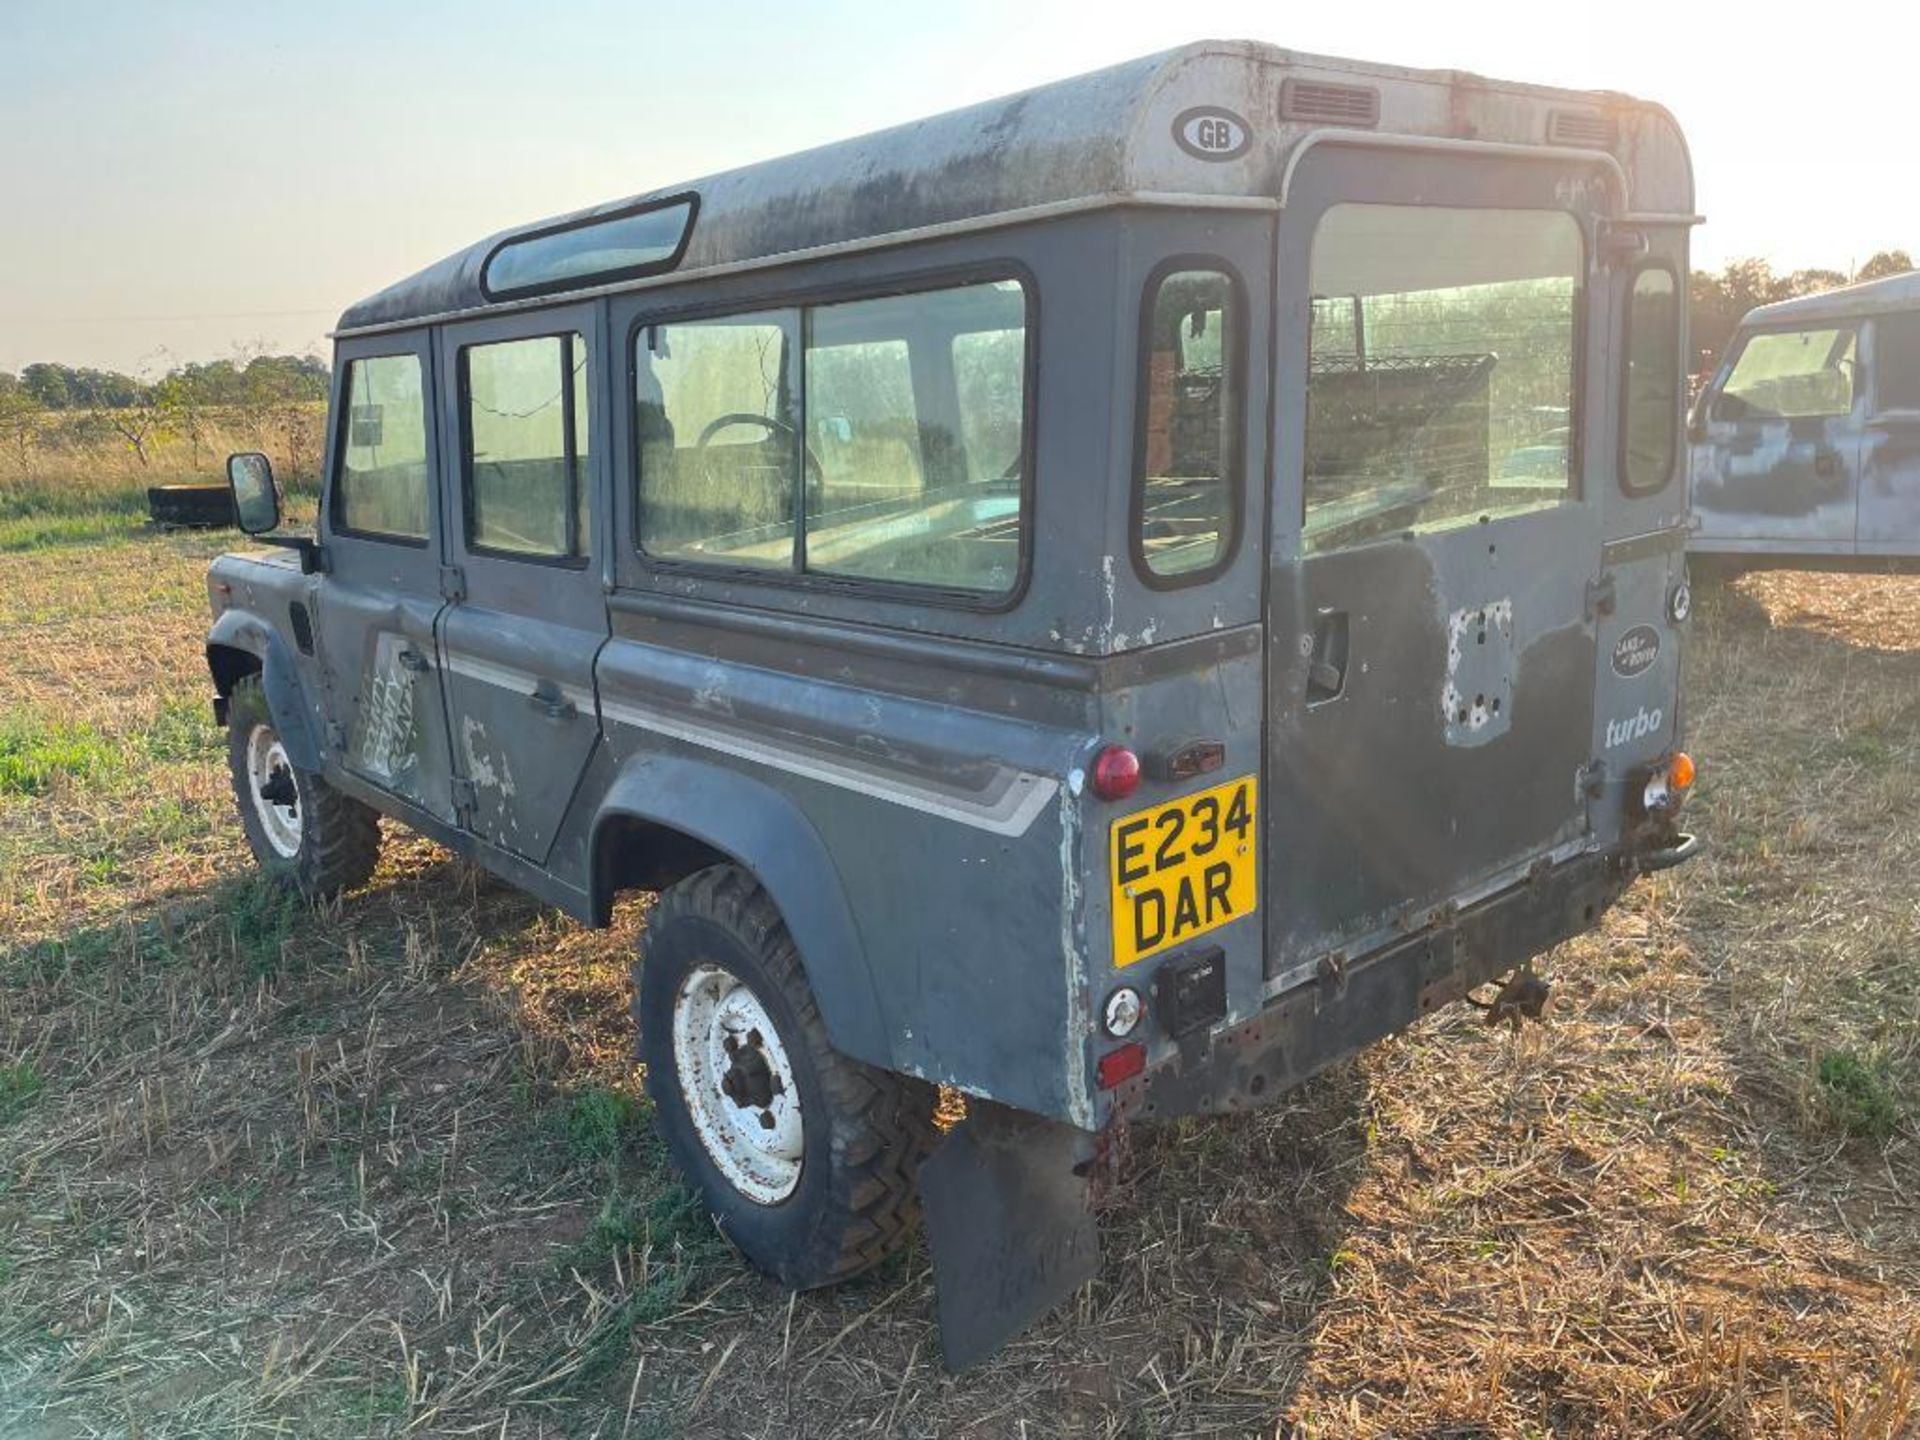 1988 Land Rover 110 County Station Wagon with 2.5l turbo engine, grey, manual, on 7.50R16 wheels and - Image 3 of 3